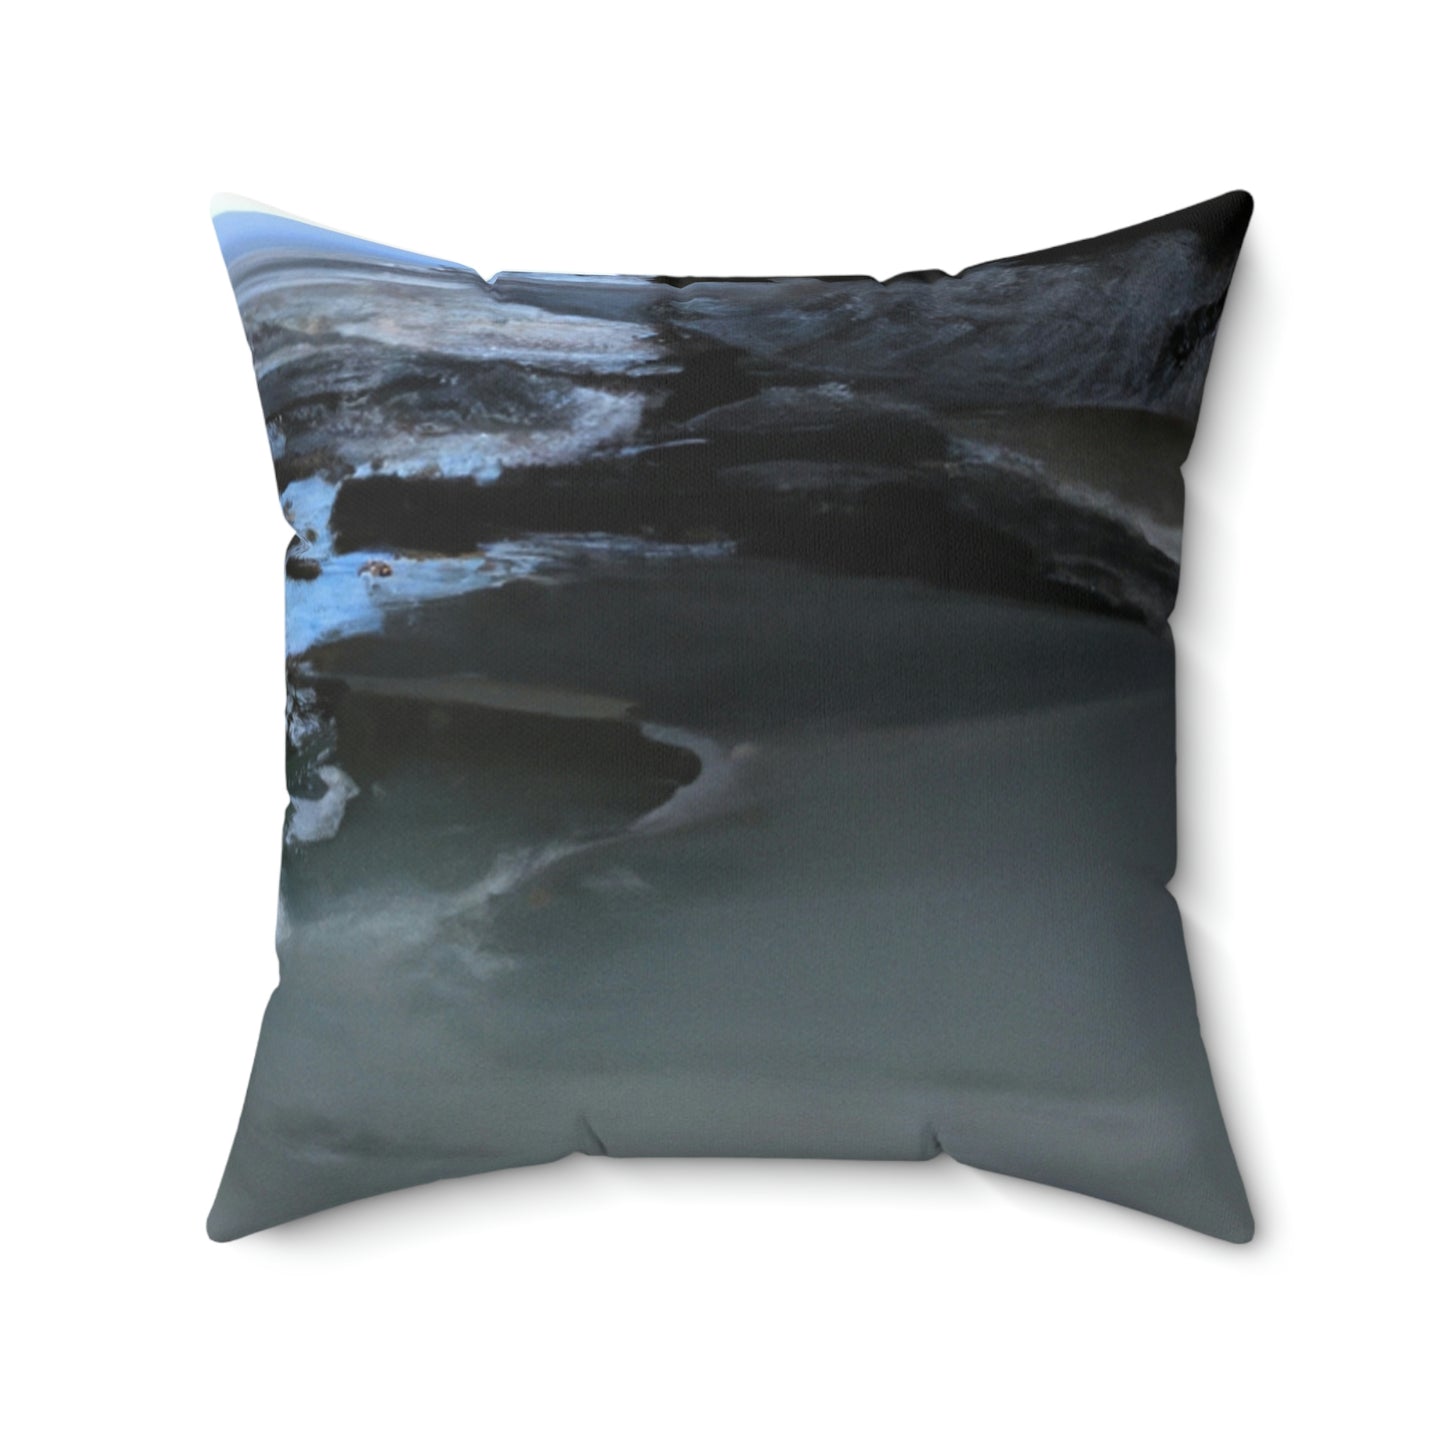 "The Frozen Depths of History" - The Alien Square Pillow